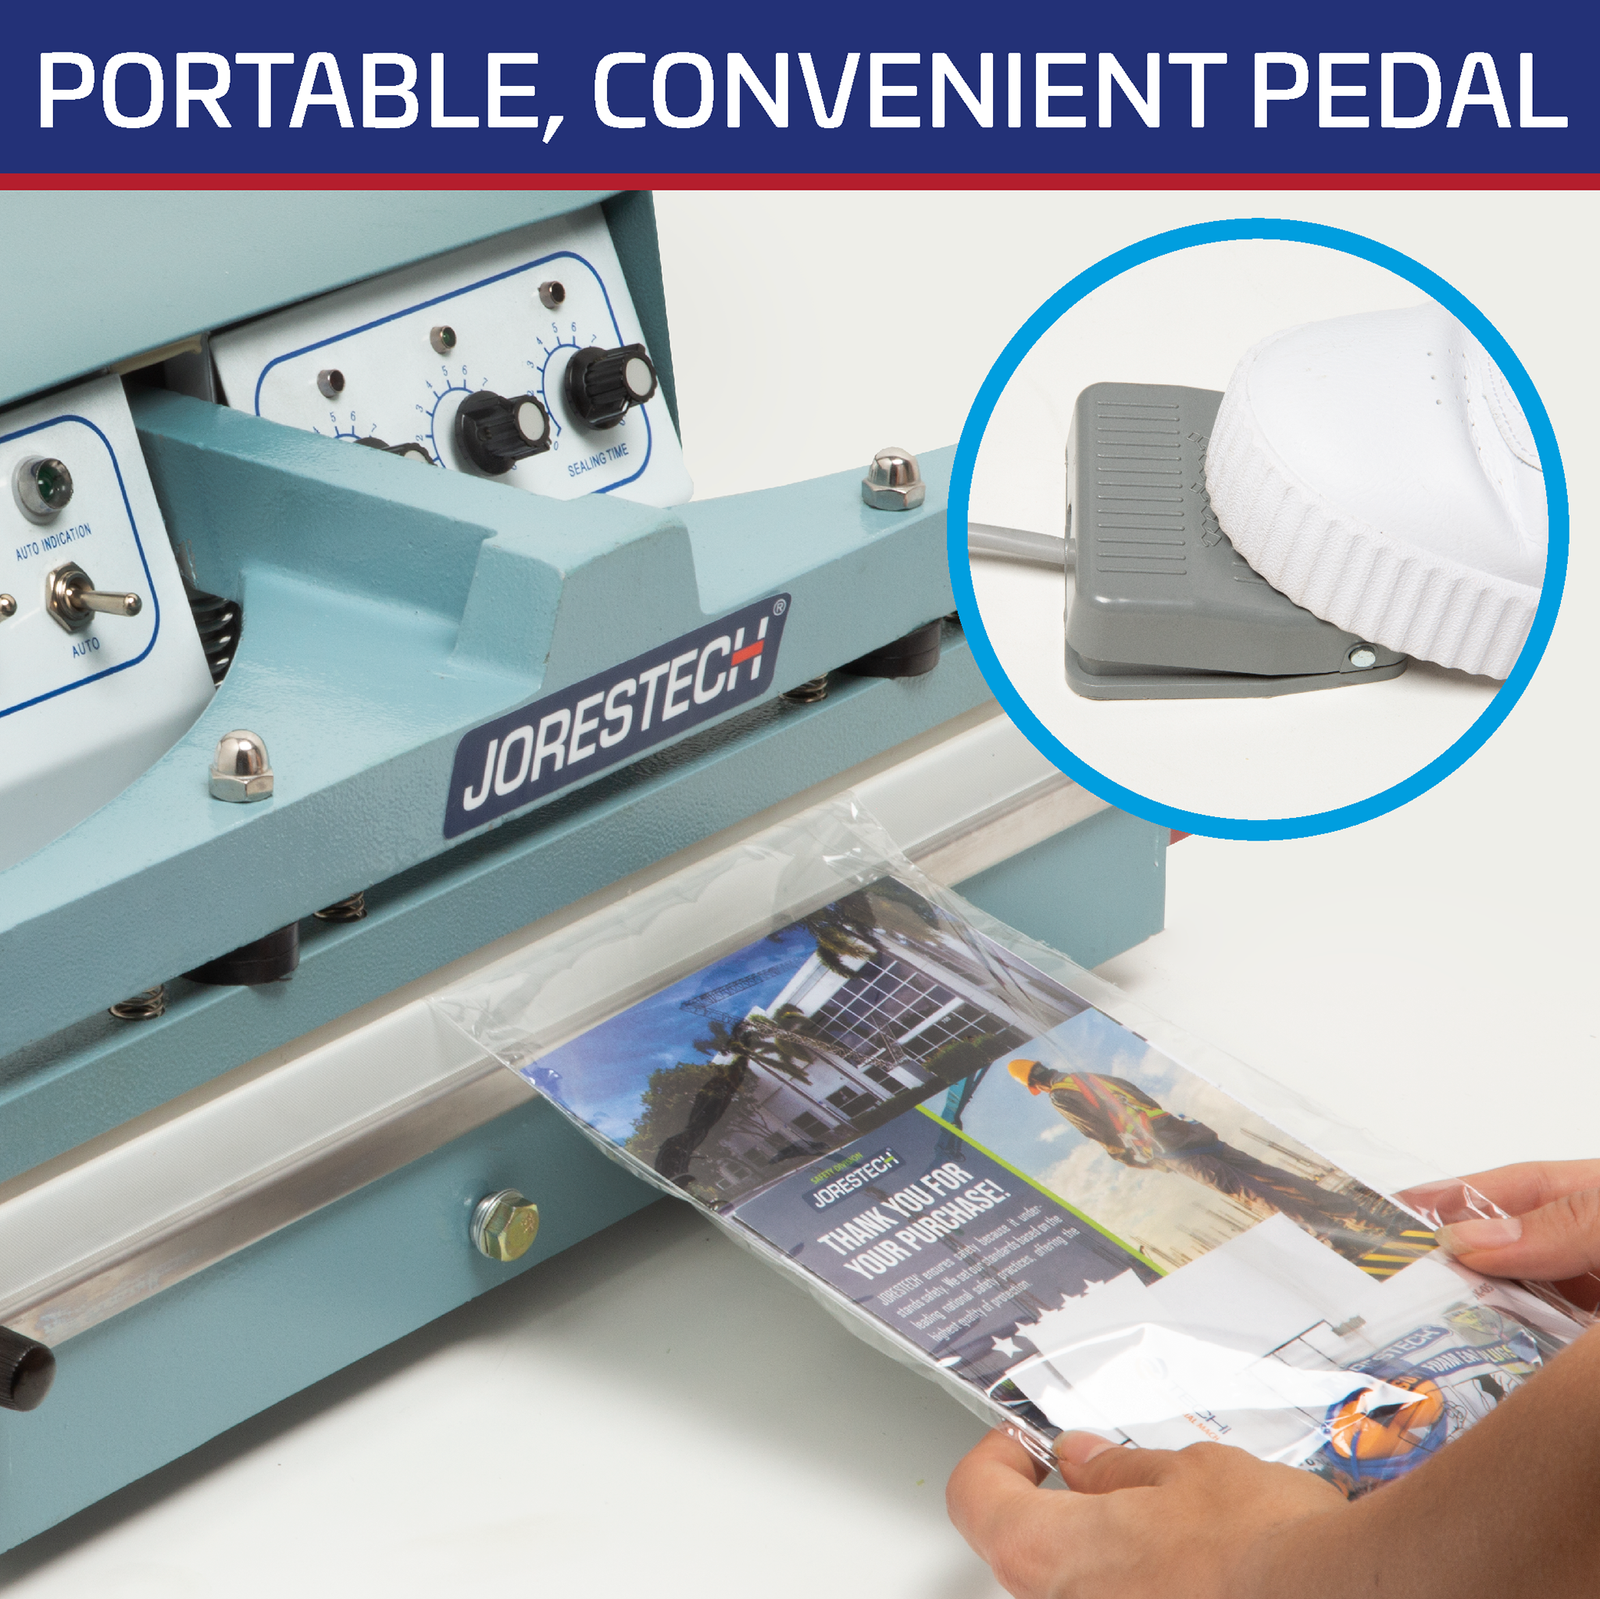 Titled reads: “Portable, Convenient Pedal” shows a promotional bundle being sealed inside a plastic bag with the JORES TECHNOLOGIES® tabletop foot sealer. There is also a highlighted showing the pedal being pressed to seal the bag.